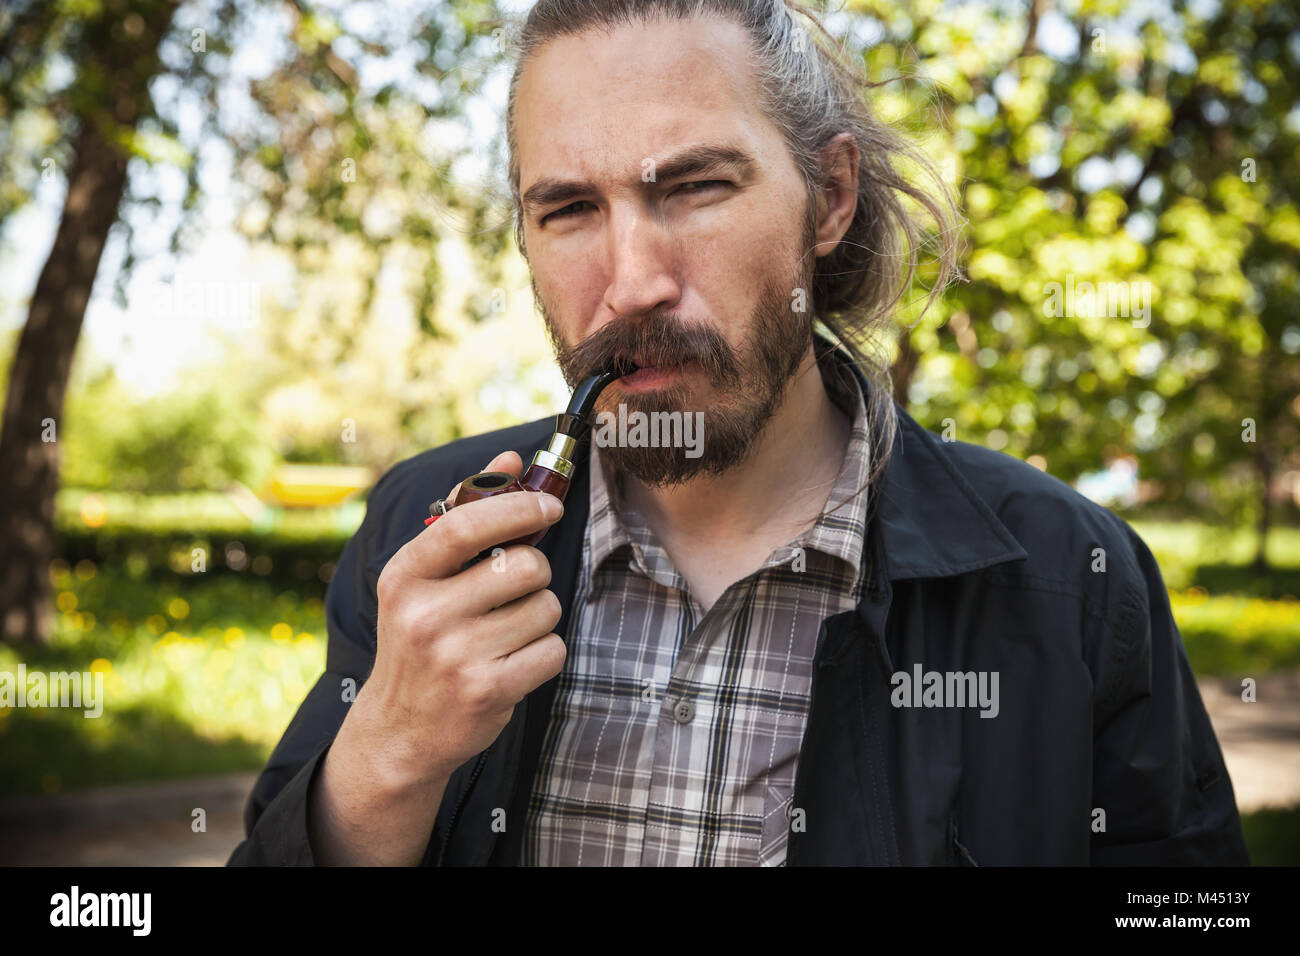 Young serious bearded man smoking pipe in summer park, close-up portrait Stock Photo